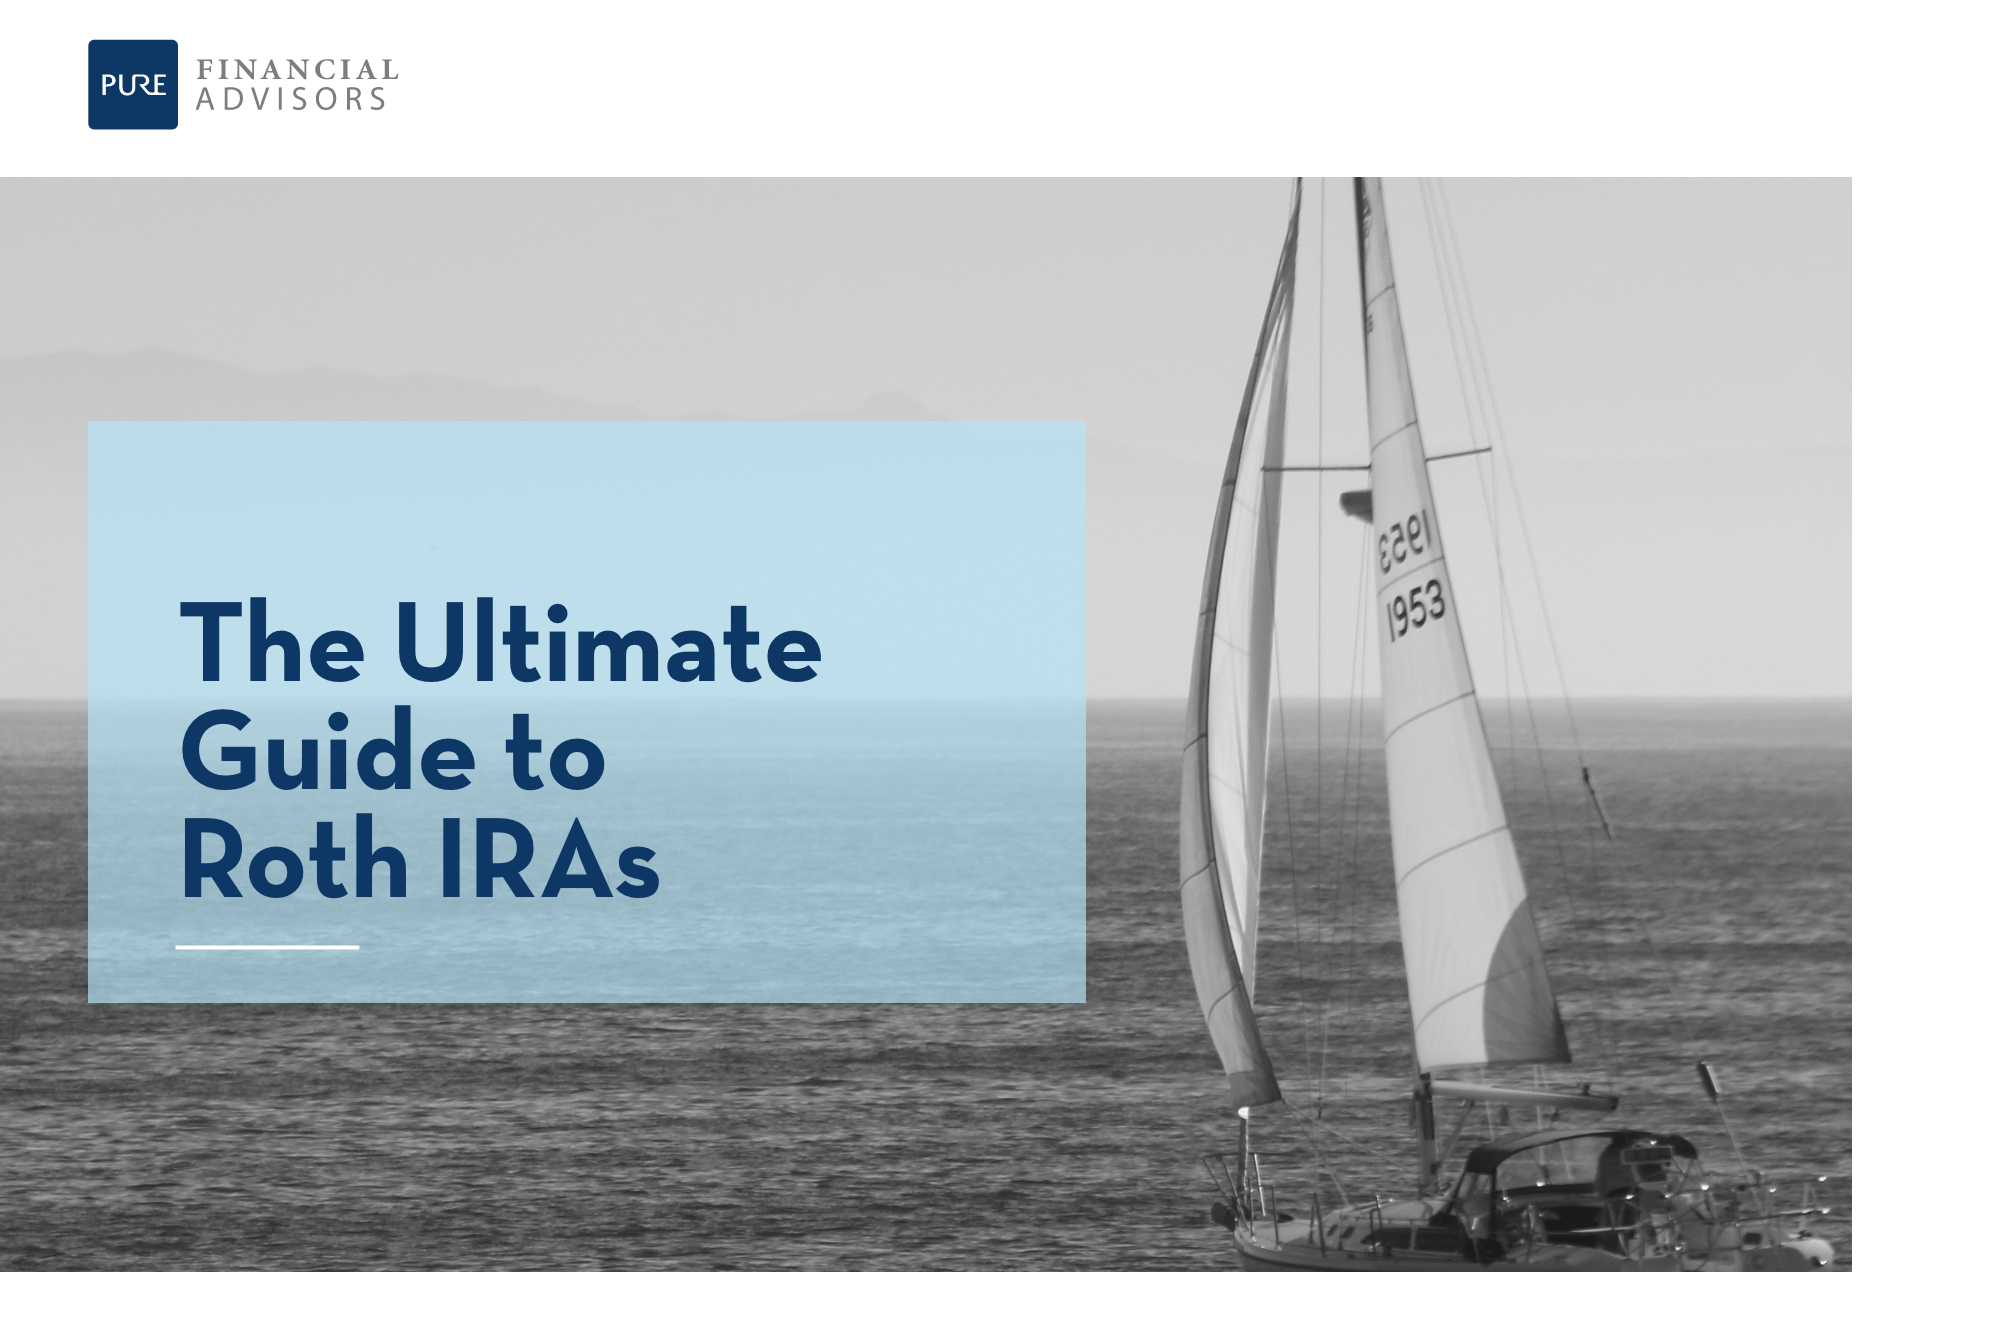 The Ultimate Guide to Roth IRAs